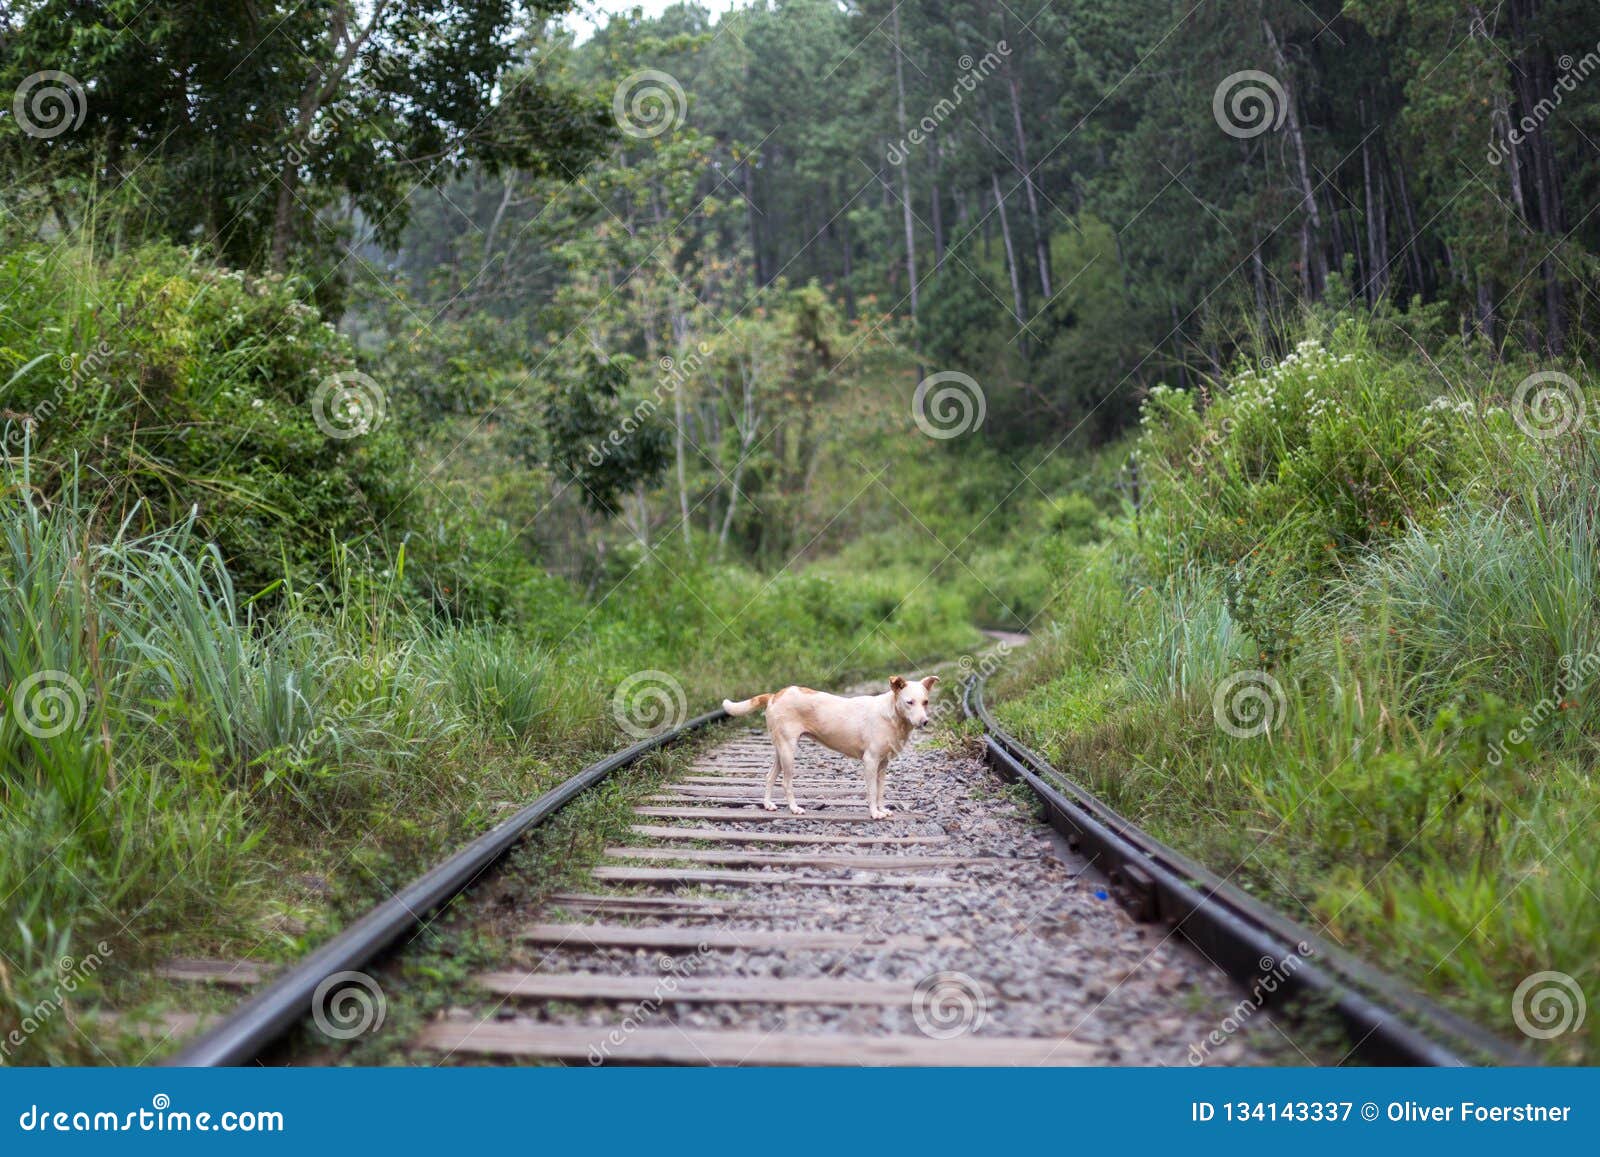 Child And Dogs On Train Tracks Stock Image - Image of 